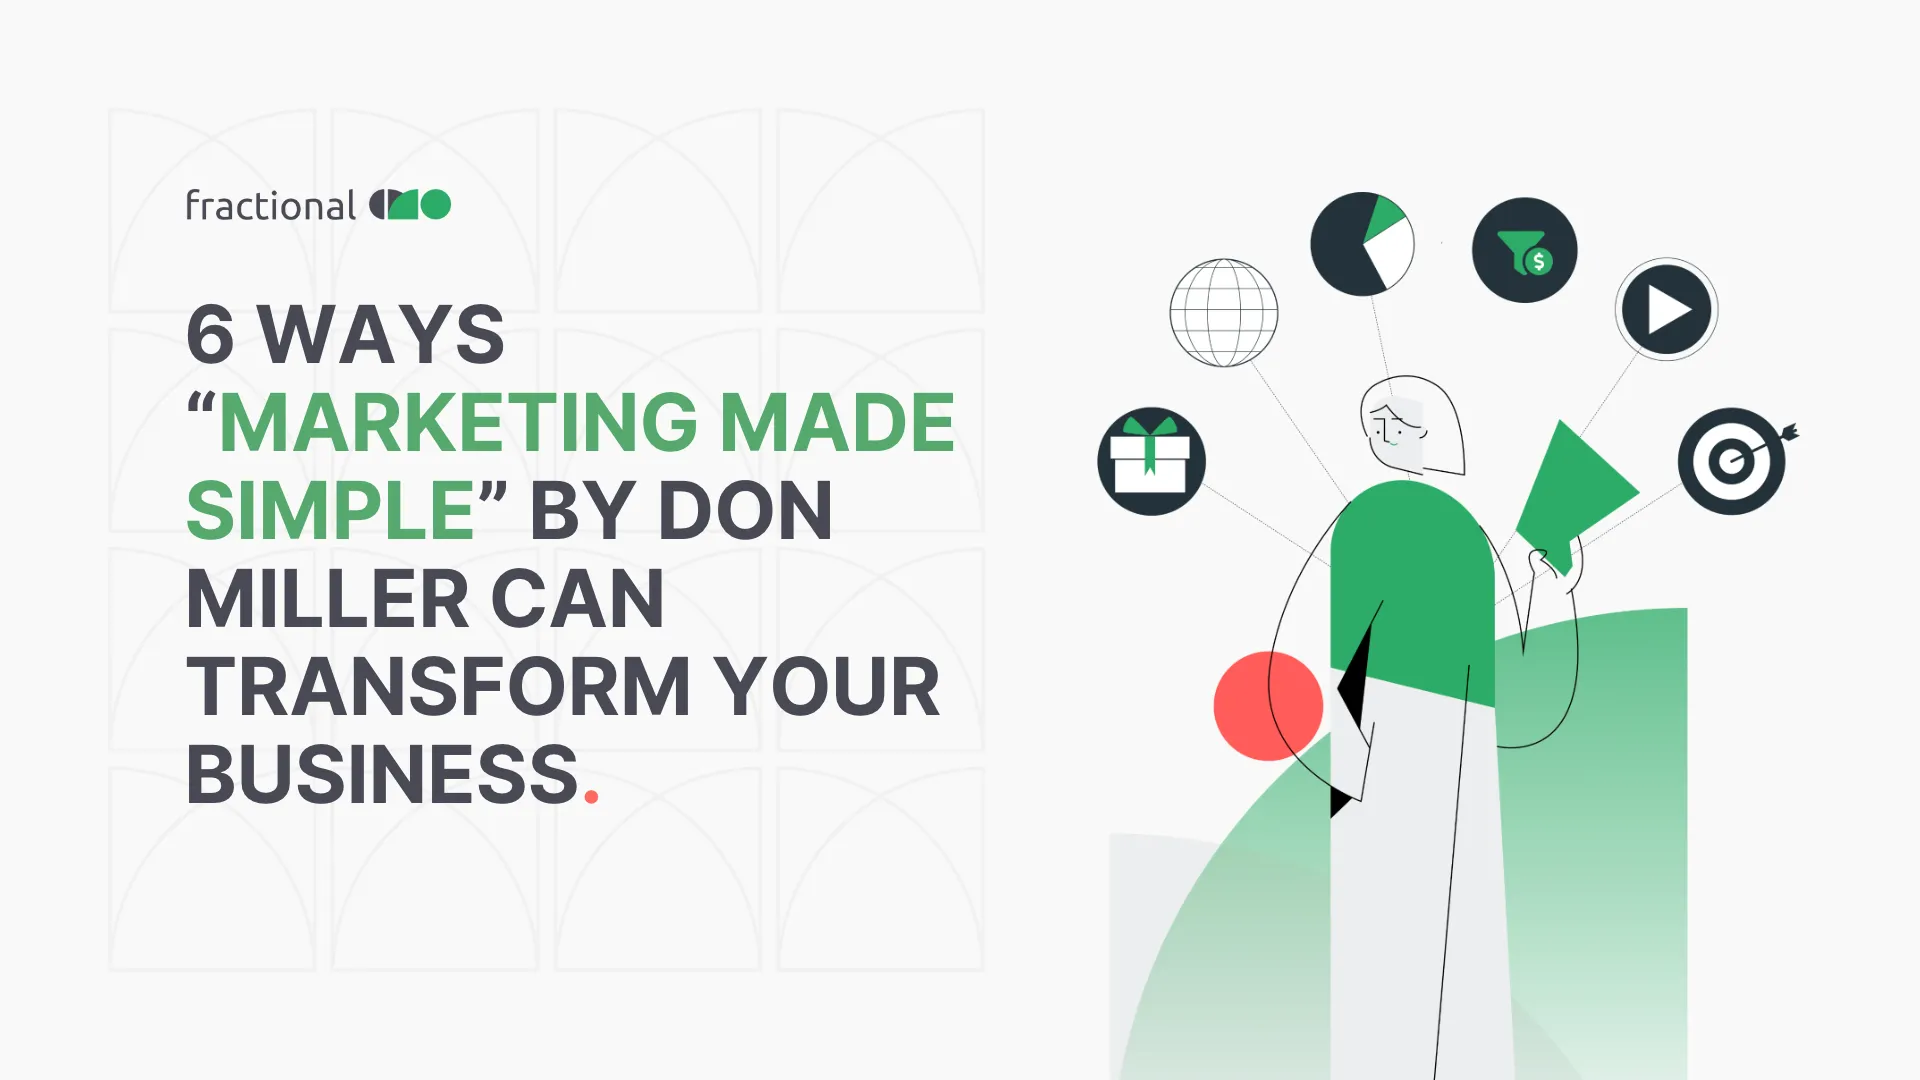 6 ways "Marketing Made Simple" course - Don Miller can transform your business